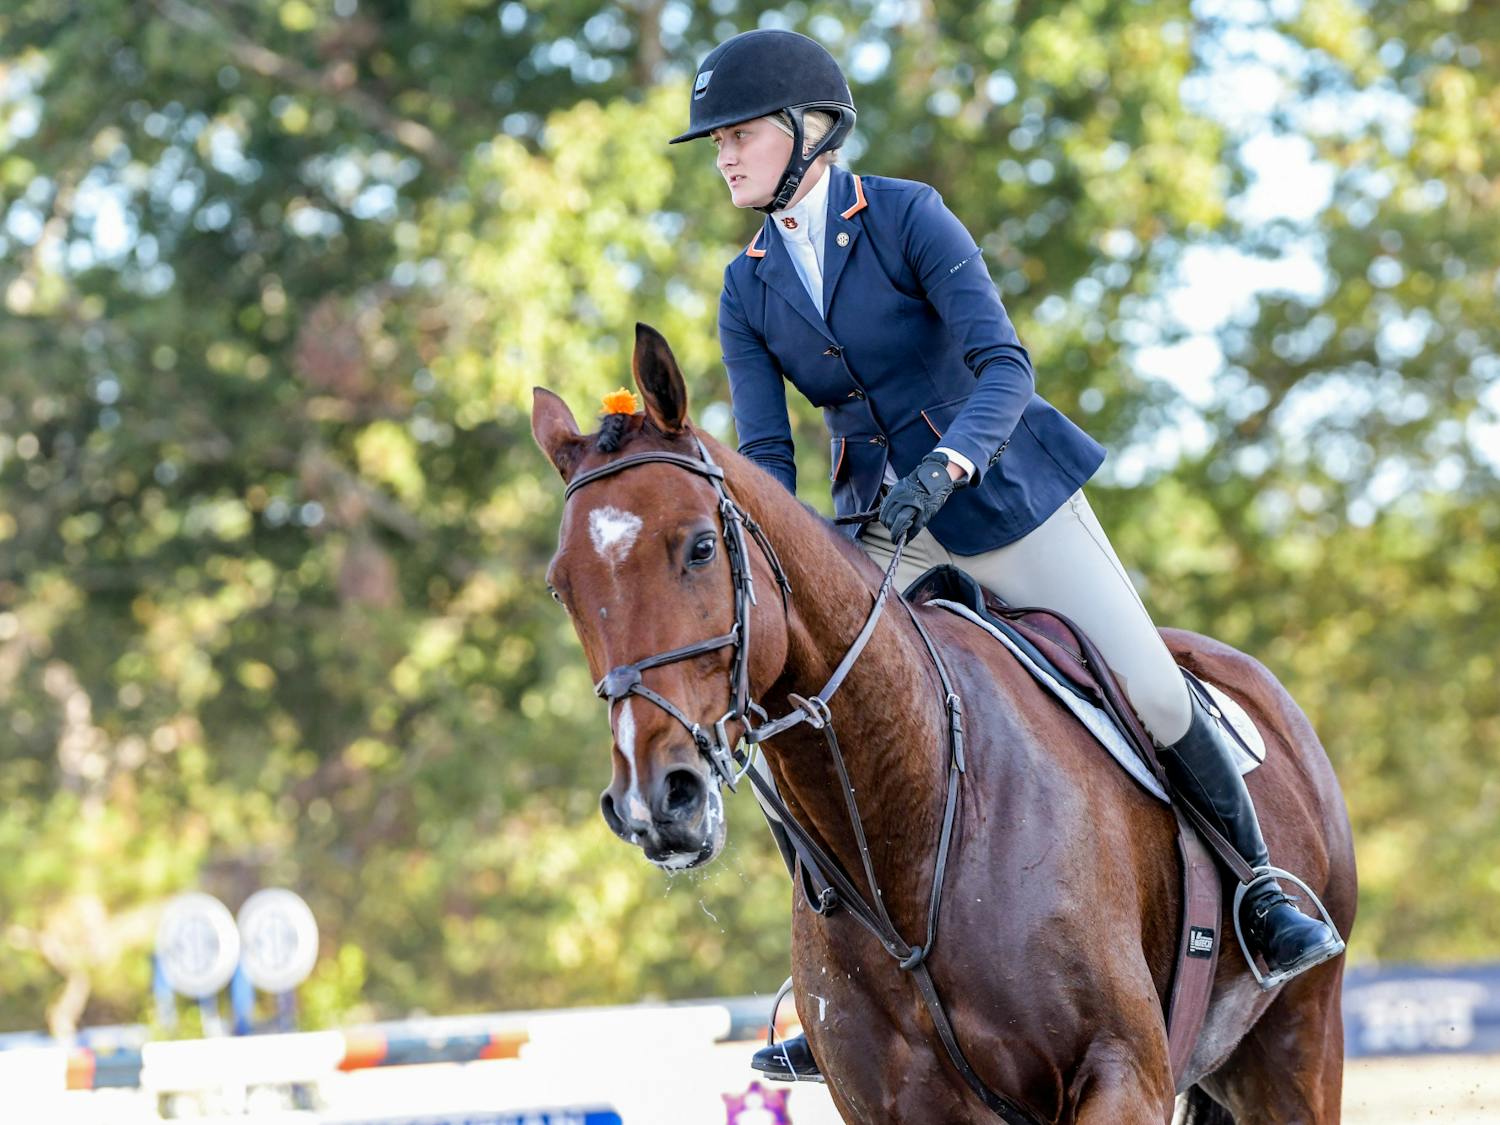 Sophee Steckbeck riding Blue in a meet against South Carolina at Auburn Equestrian Center on Oct. 27, 2023